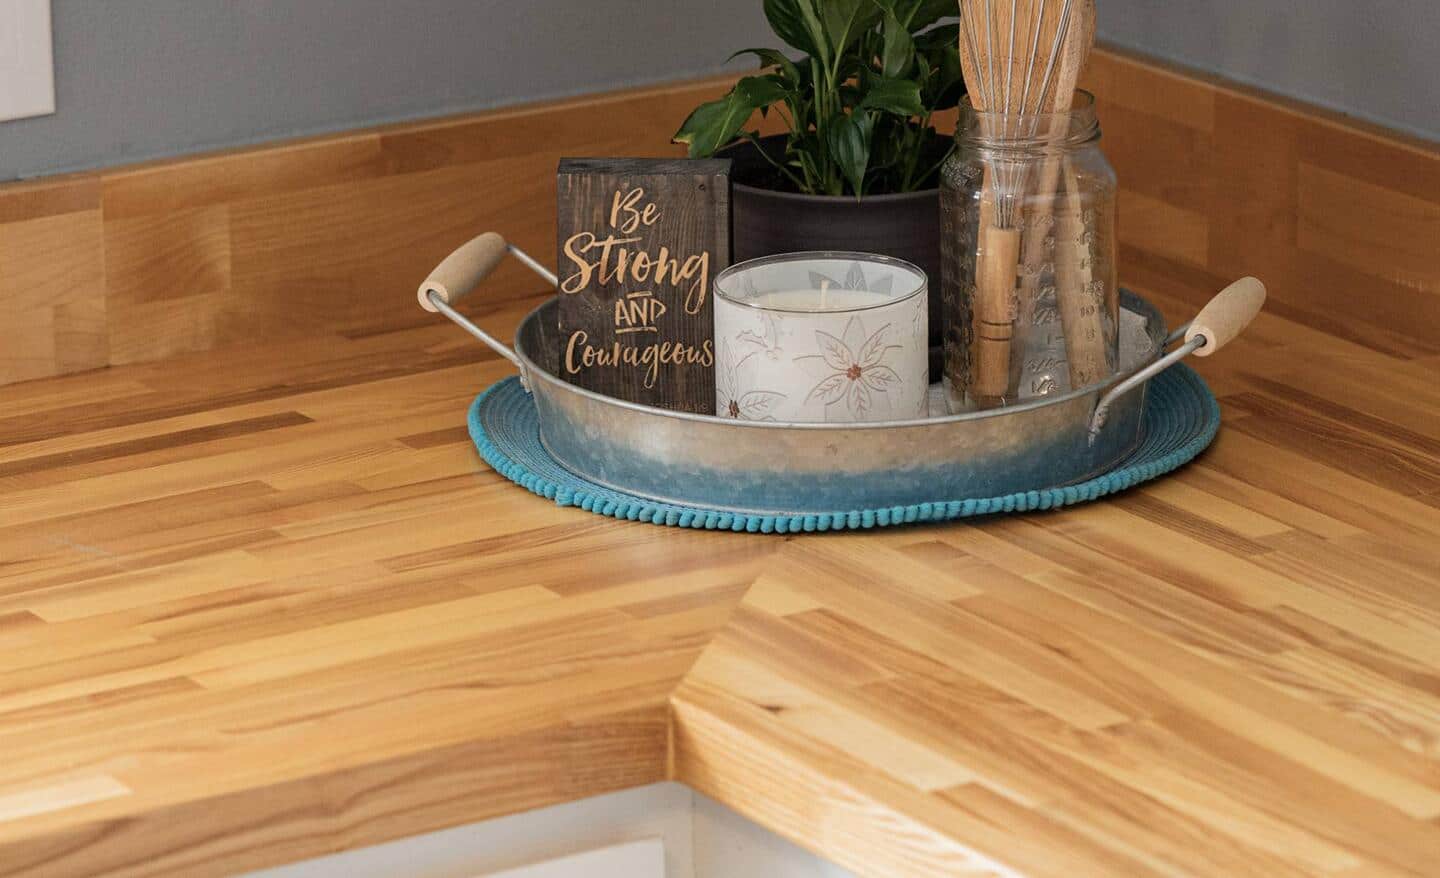 A butcher block countertop installed in the corner of a kitchen.